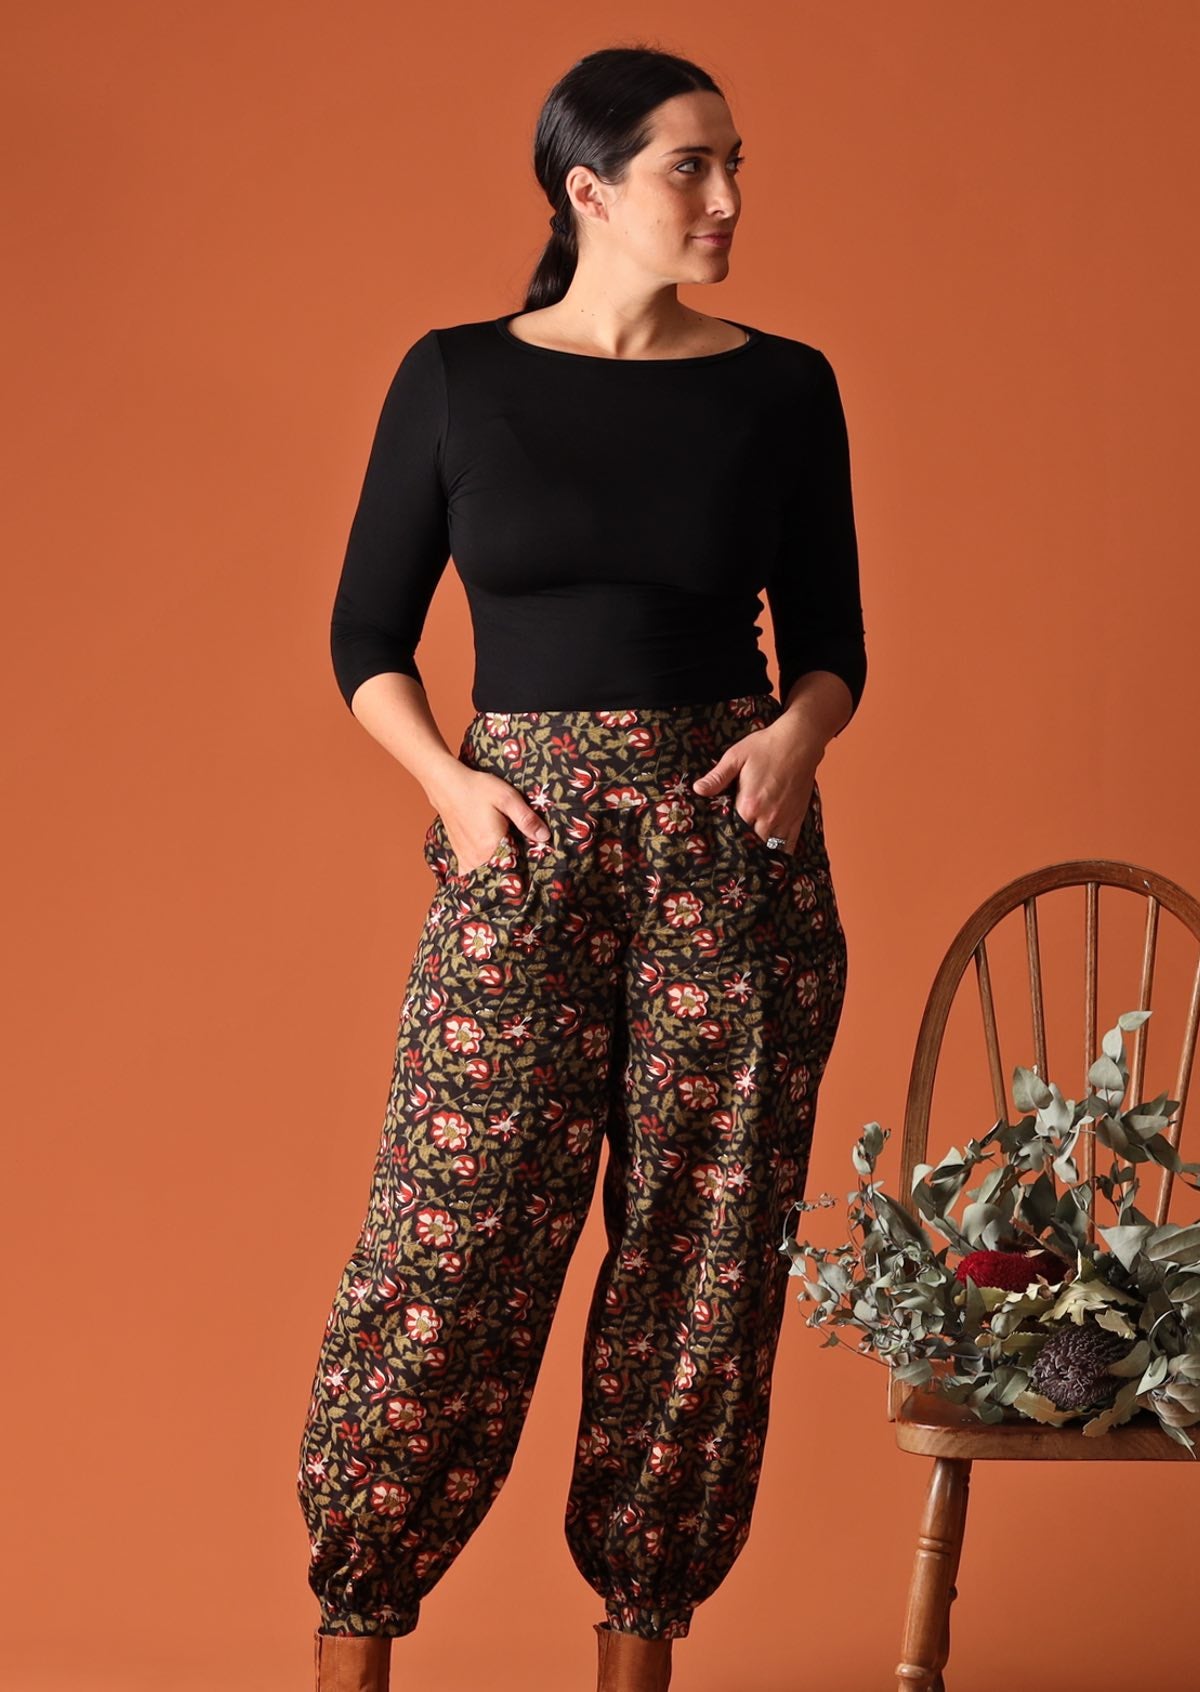 Lightweight Cotton Pants Black and Olive Green Floral Print